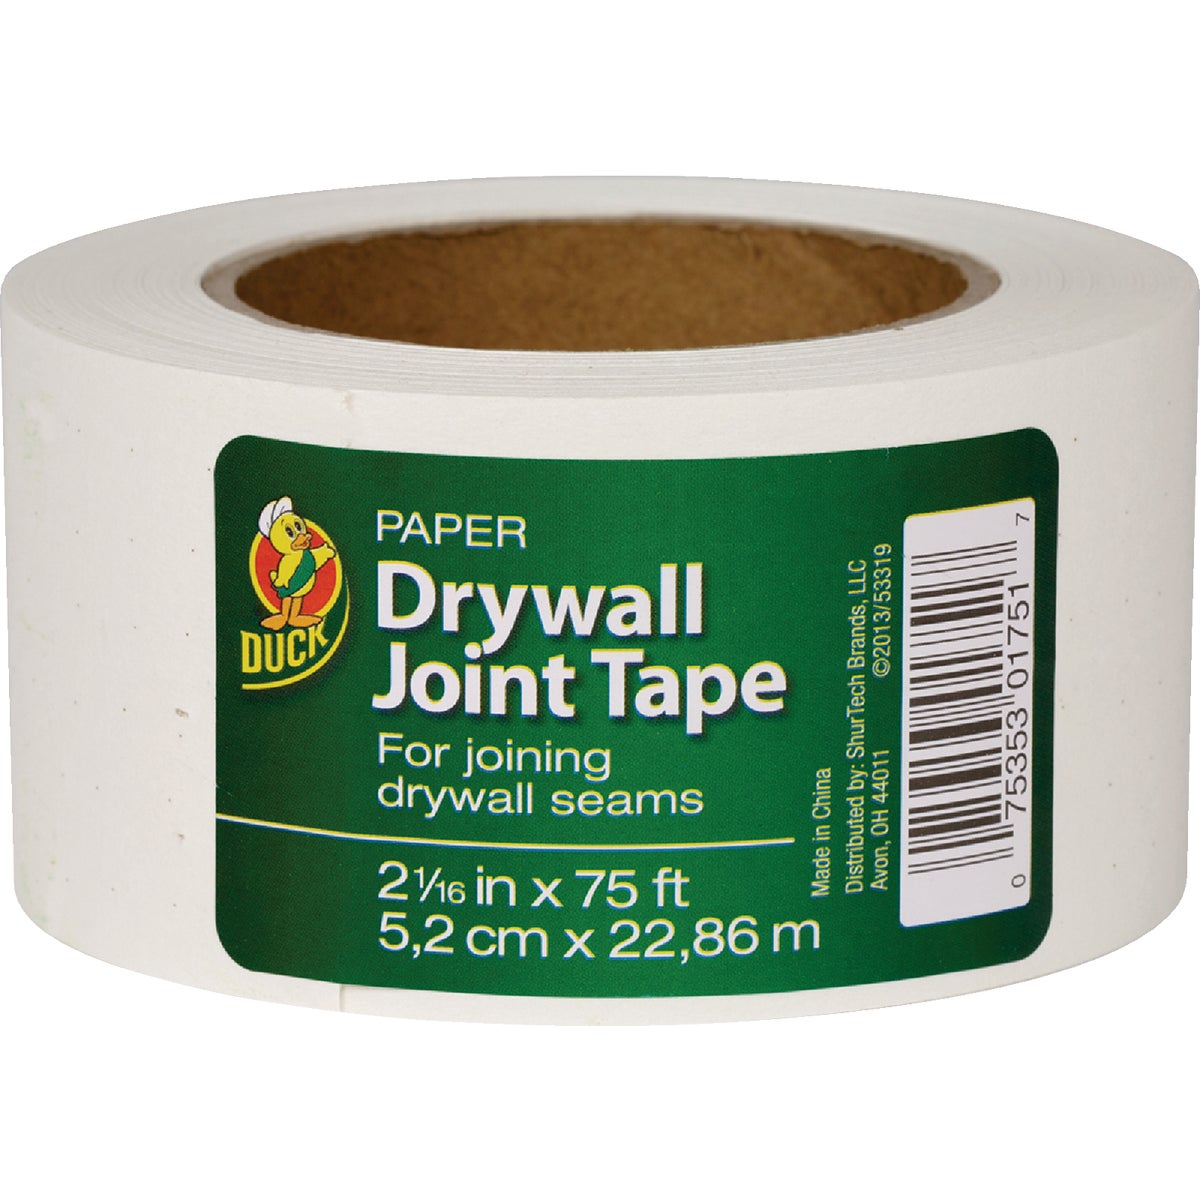 Duck 2-1/16 In. x 75 Ft. Joint Drywall Tape